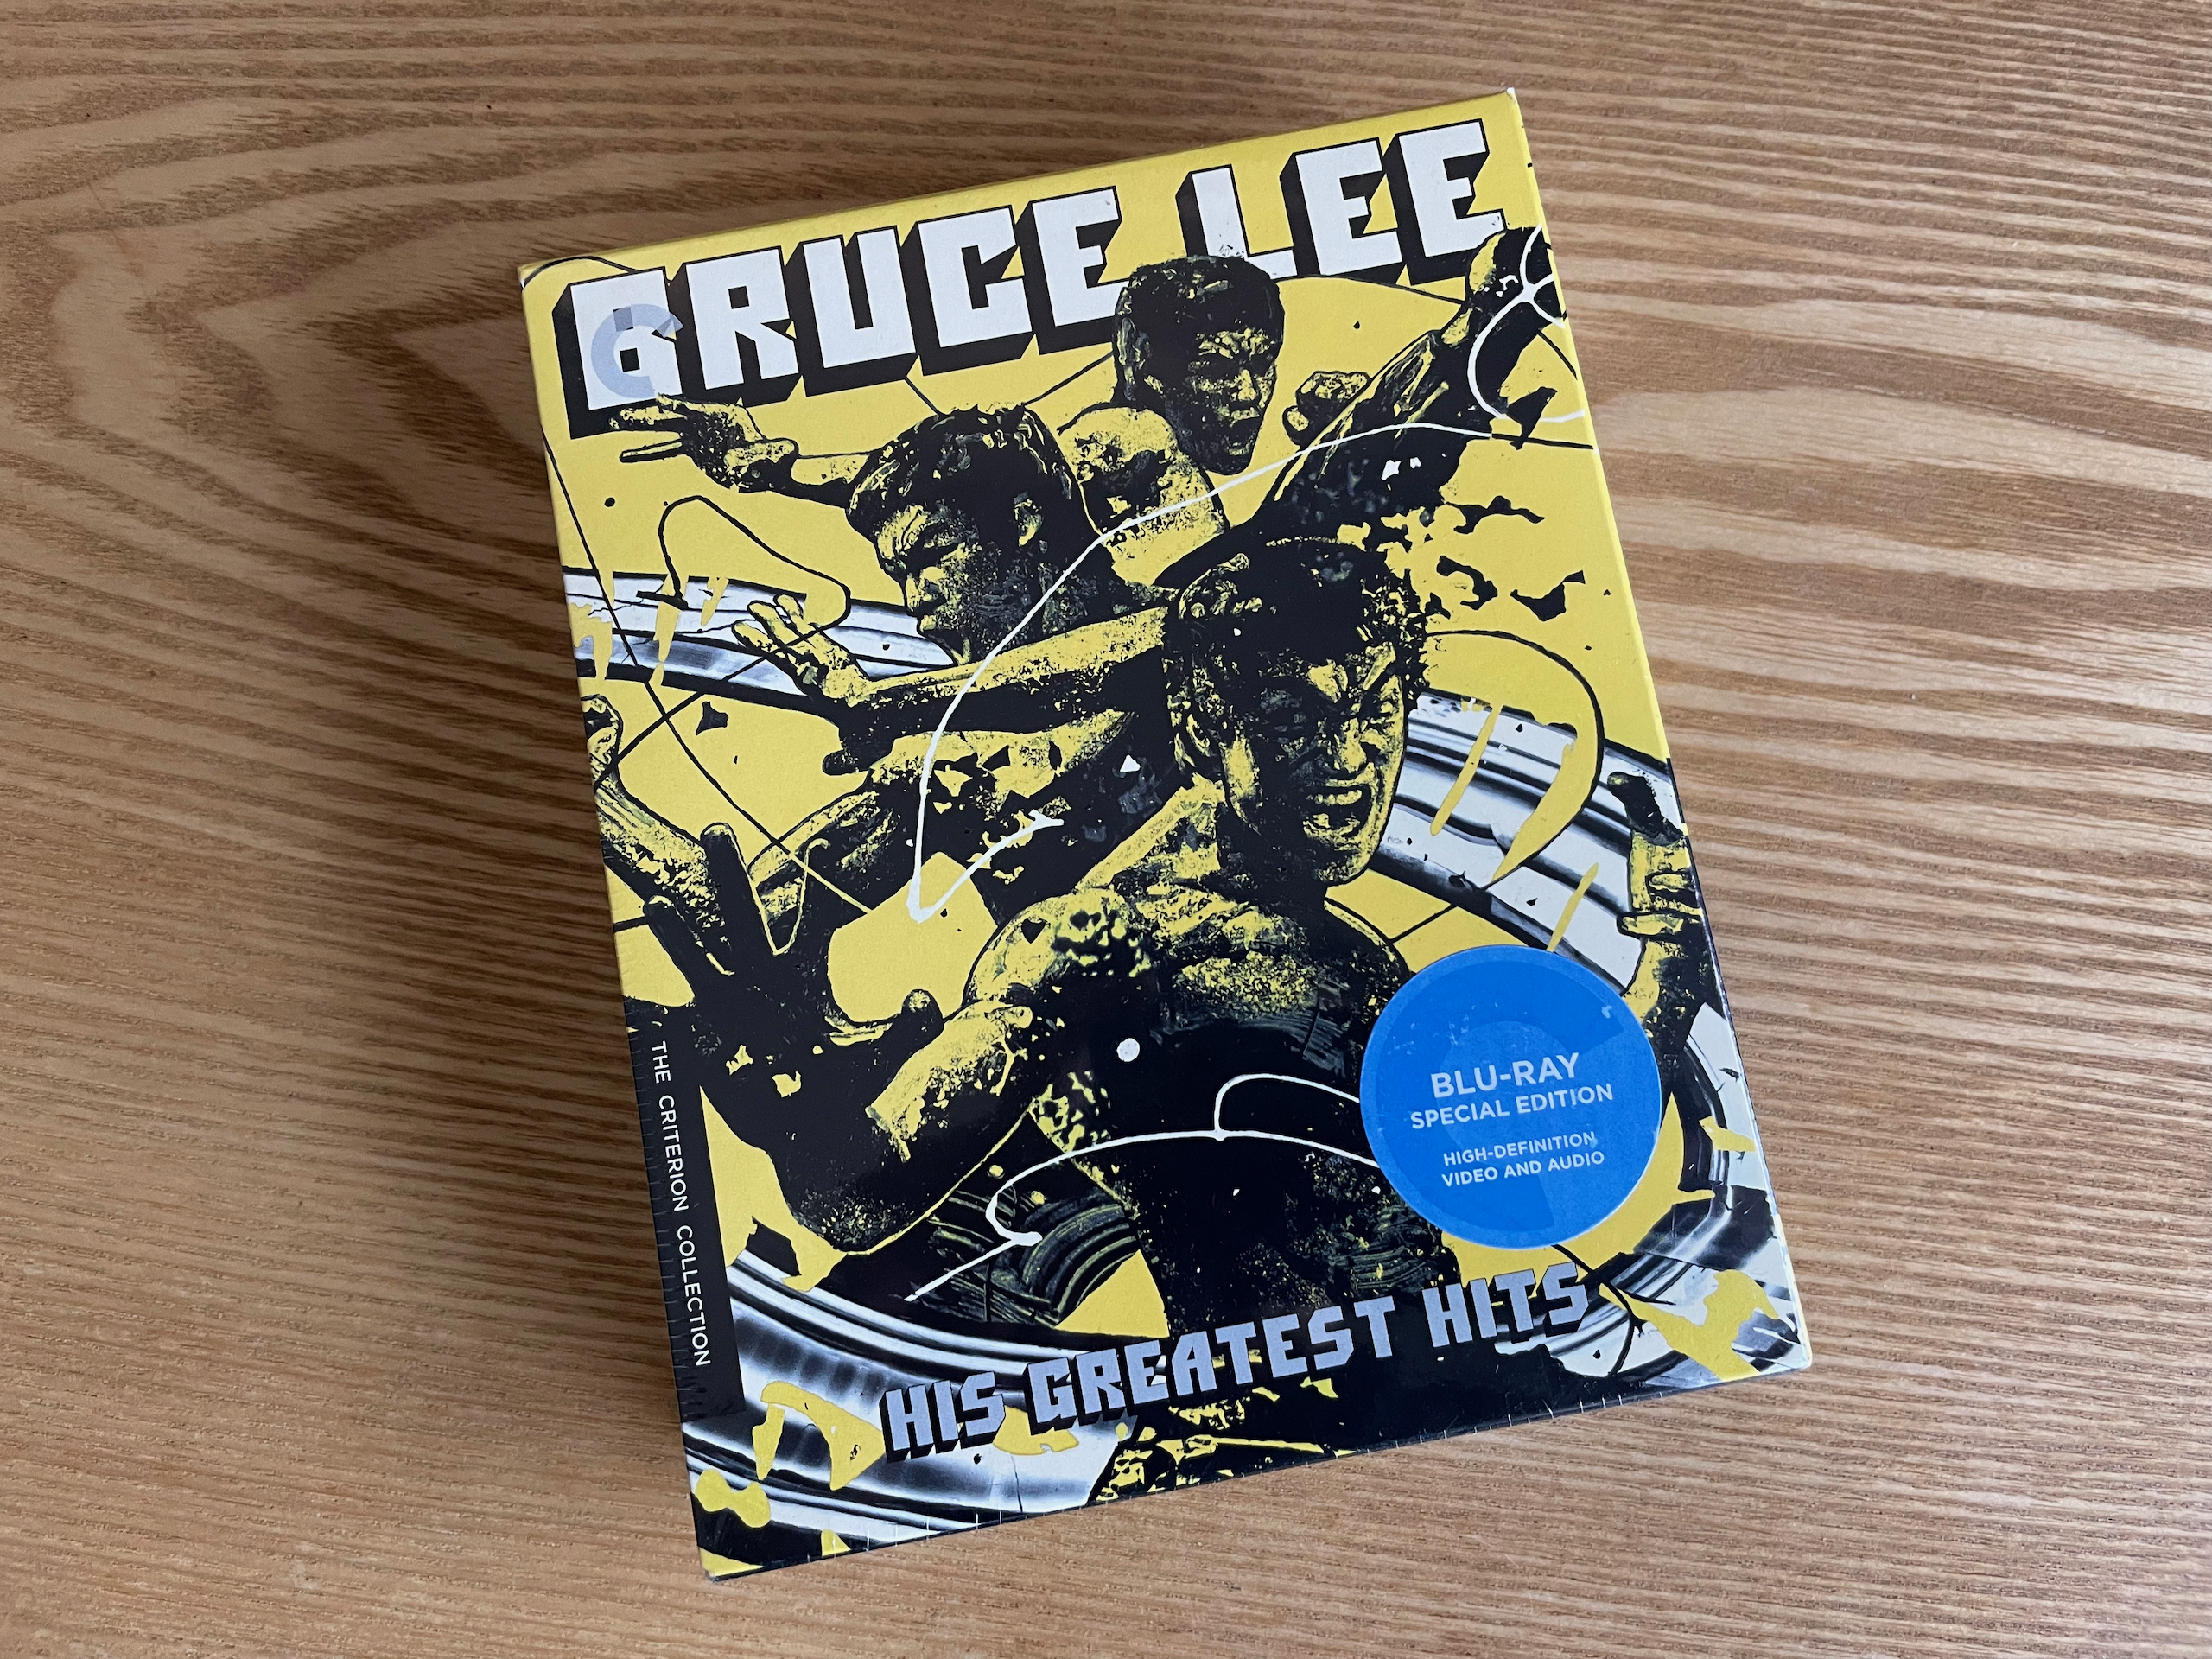 Bruce Lee: His Greatest Hits (Criterion Collection) [Blu-ray]